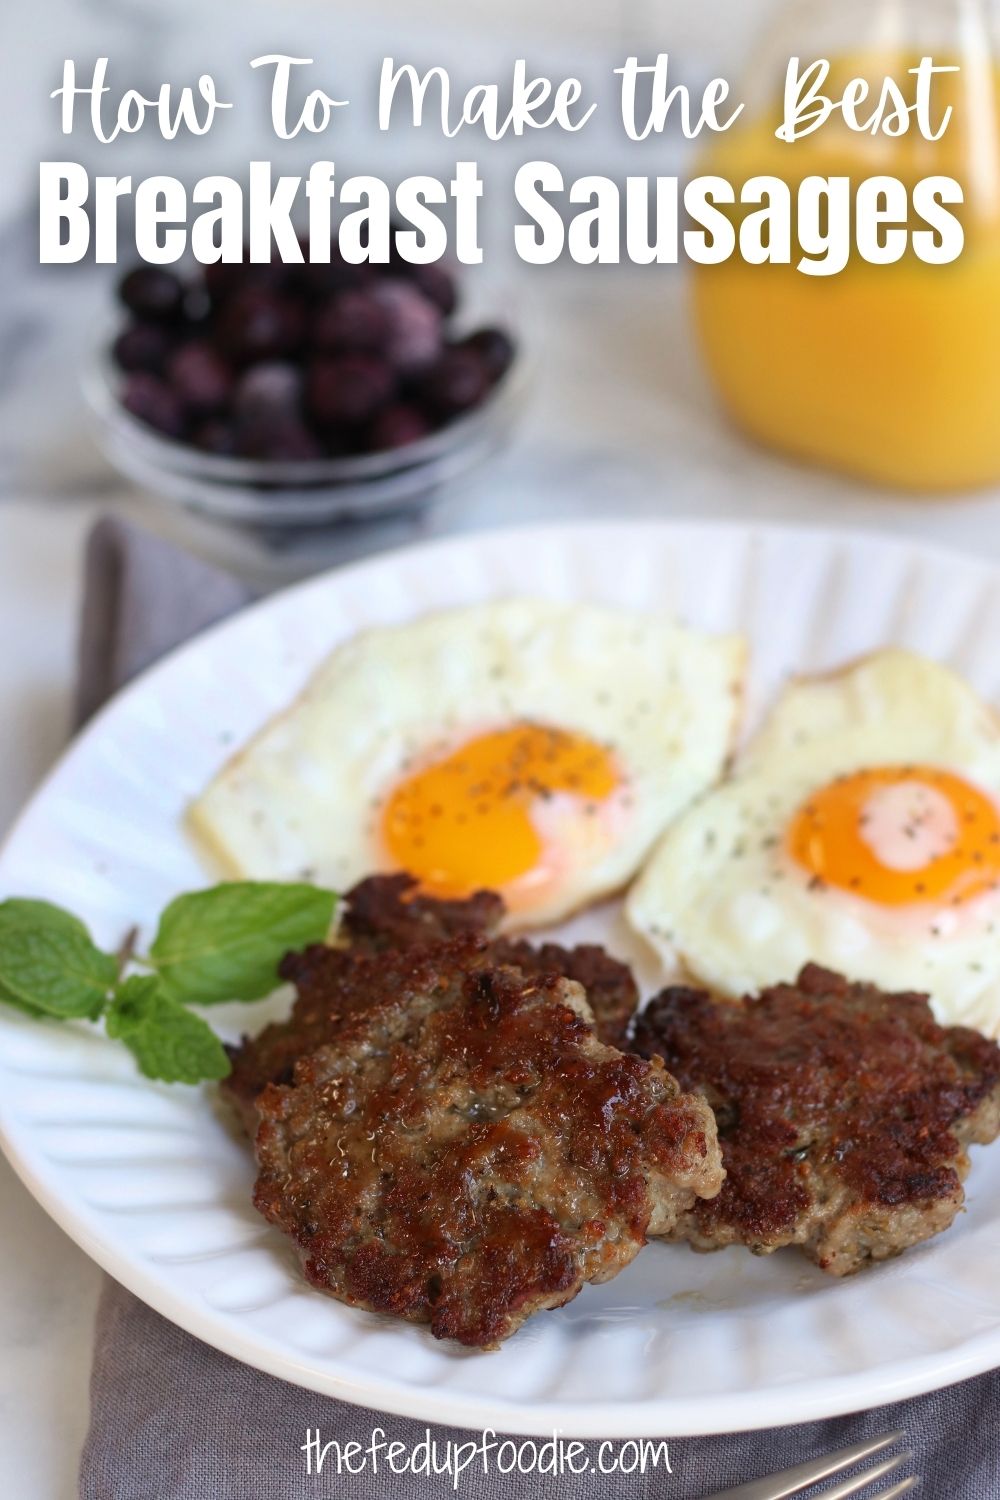 Homemade Breakfast Sausage is freezer friendly, extremely simple to make and extra tasty with a homemade spice blend. Make up a double batch and freeze for easy breakfast recipes throughout the month. 
#BreakfastSausageRecipes #BreakfastSausageSeasoning #BreakfastSausage #HomemadeBreakfastSausage #PorkBreakfastSausageRecipes